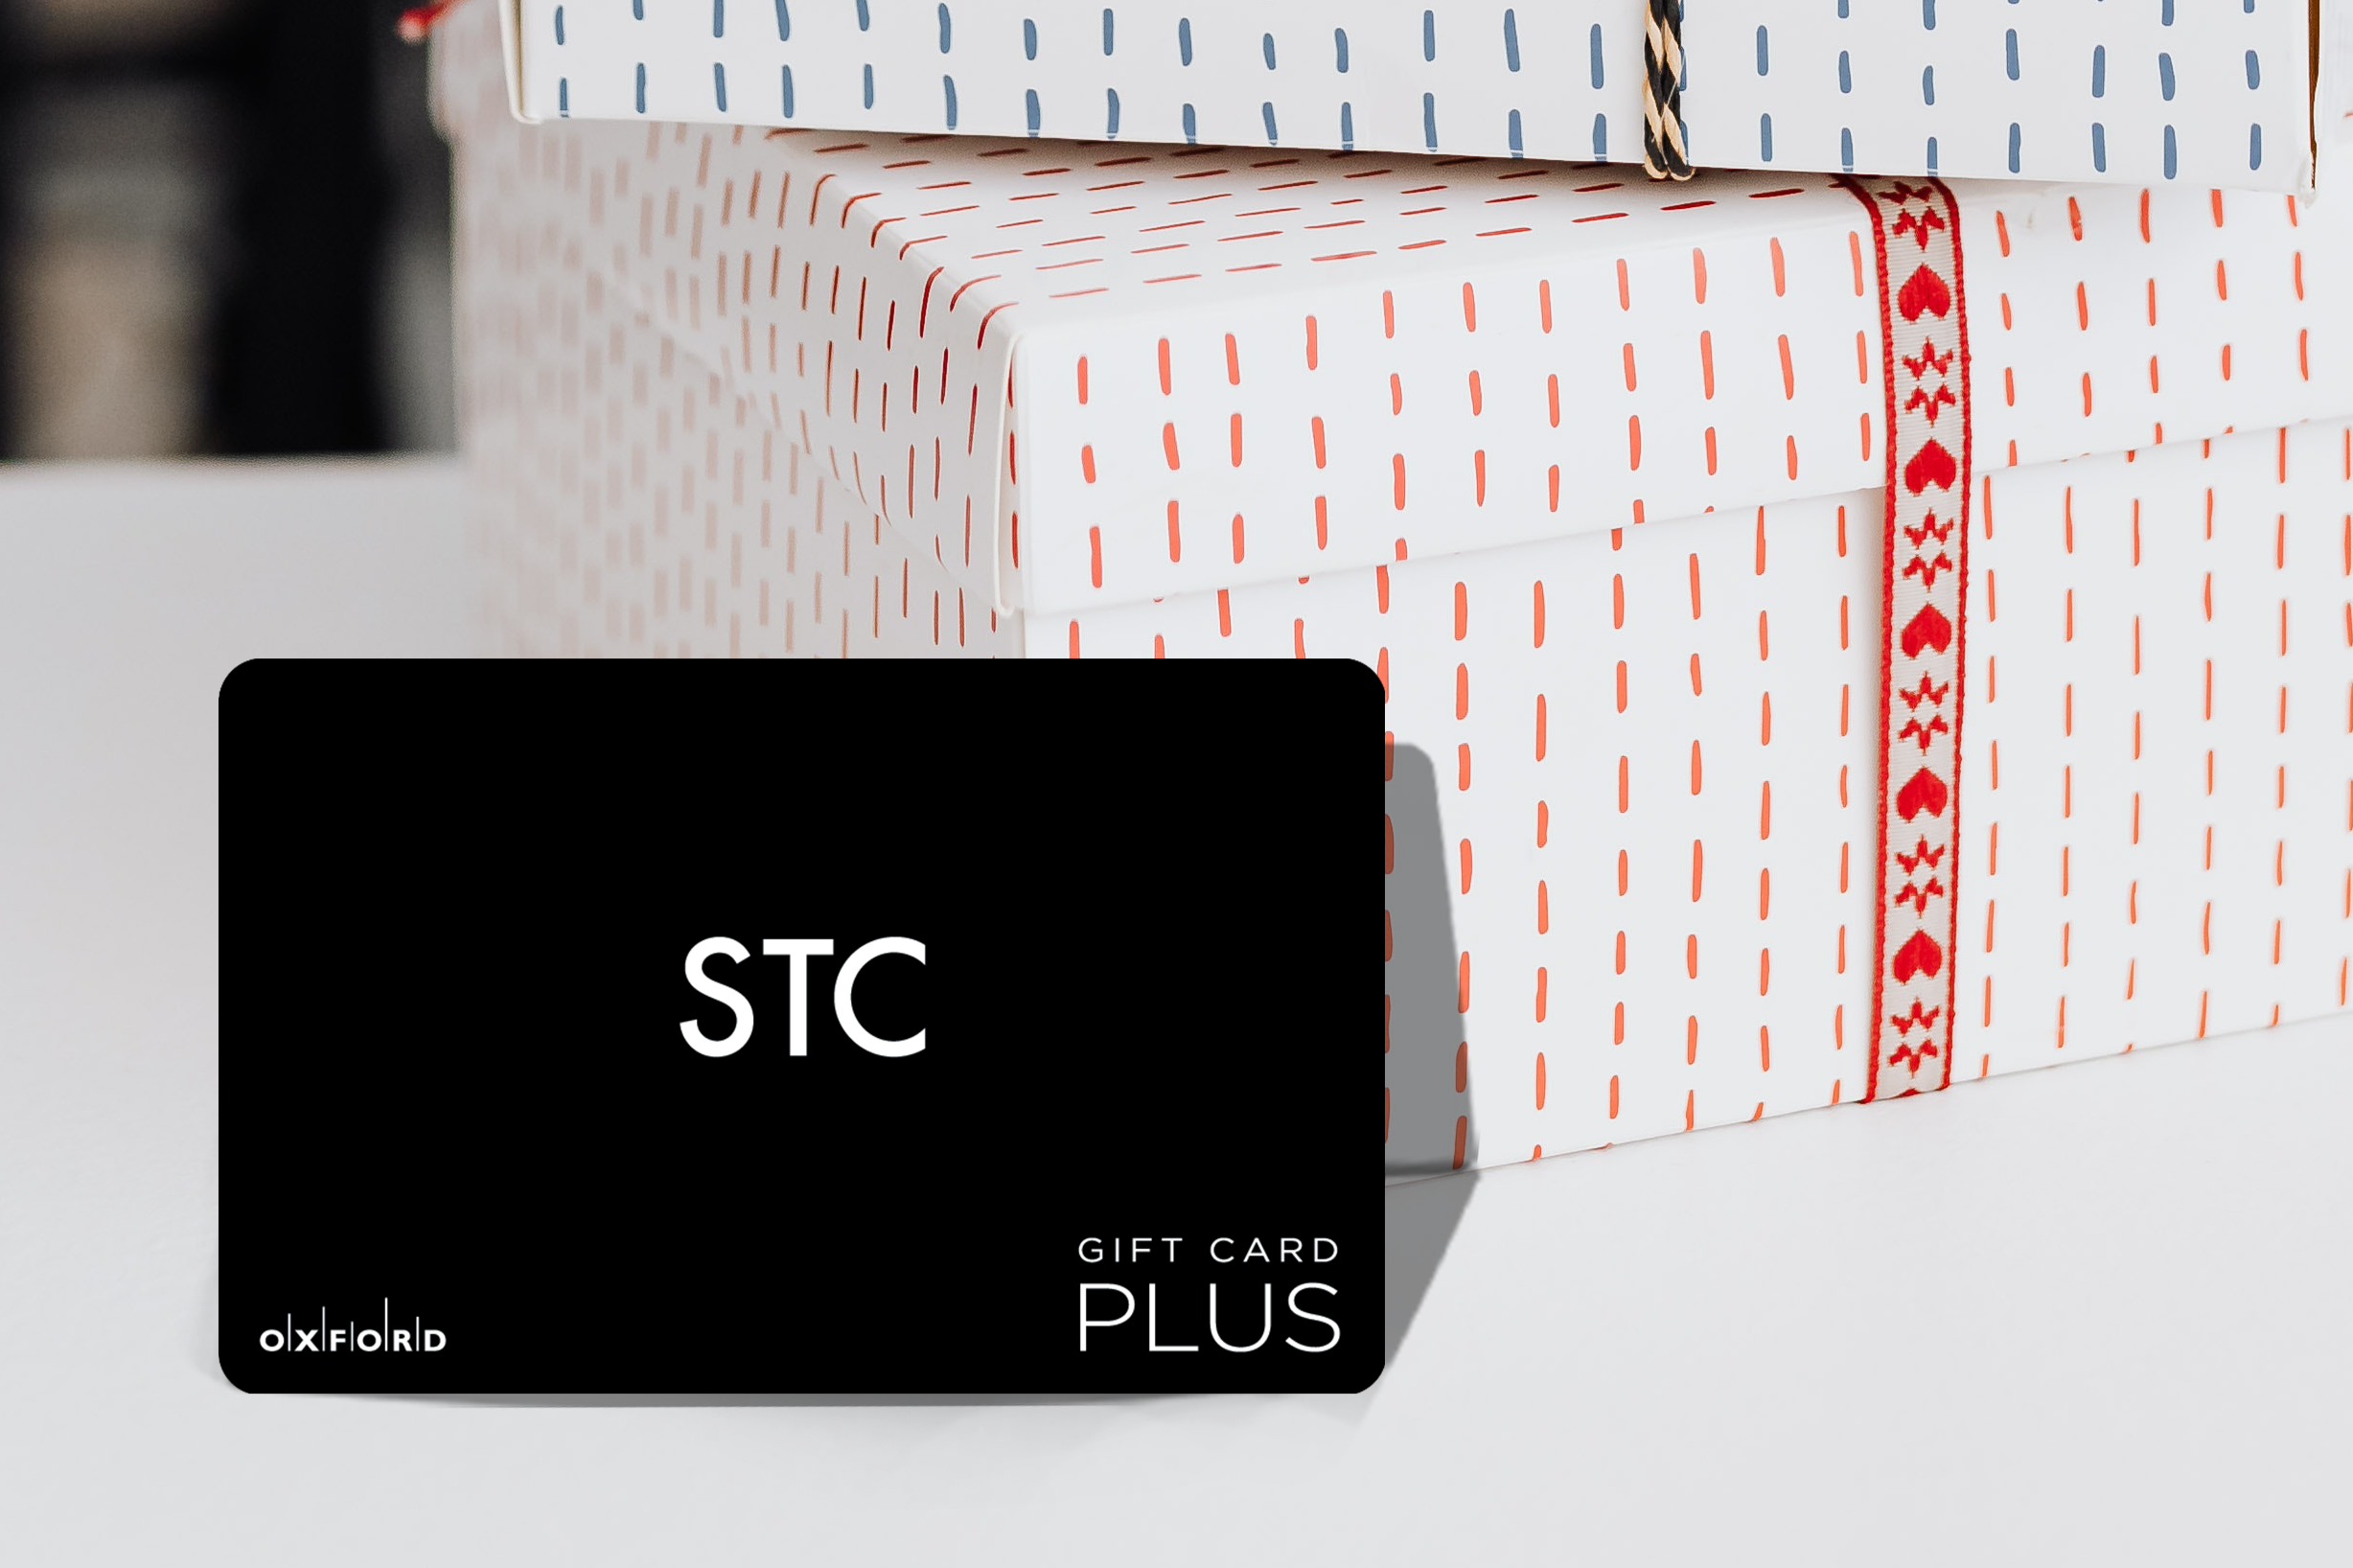 promotional image of a black STC gift card perched in front of two gift boxes